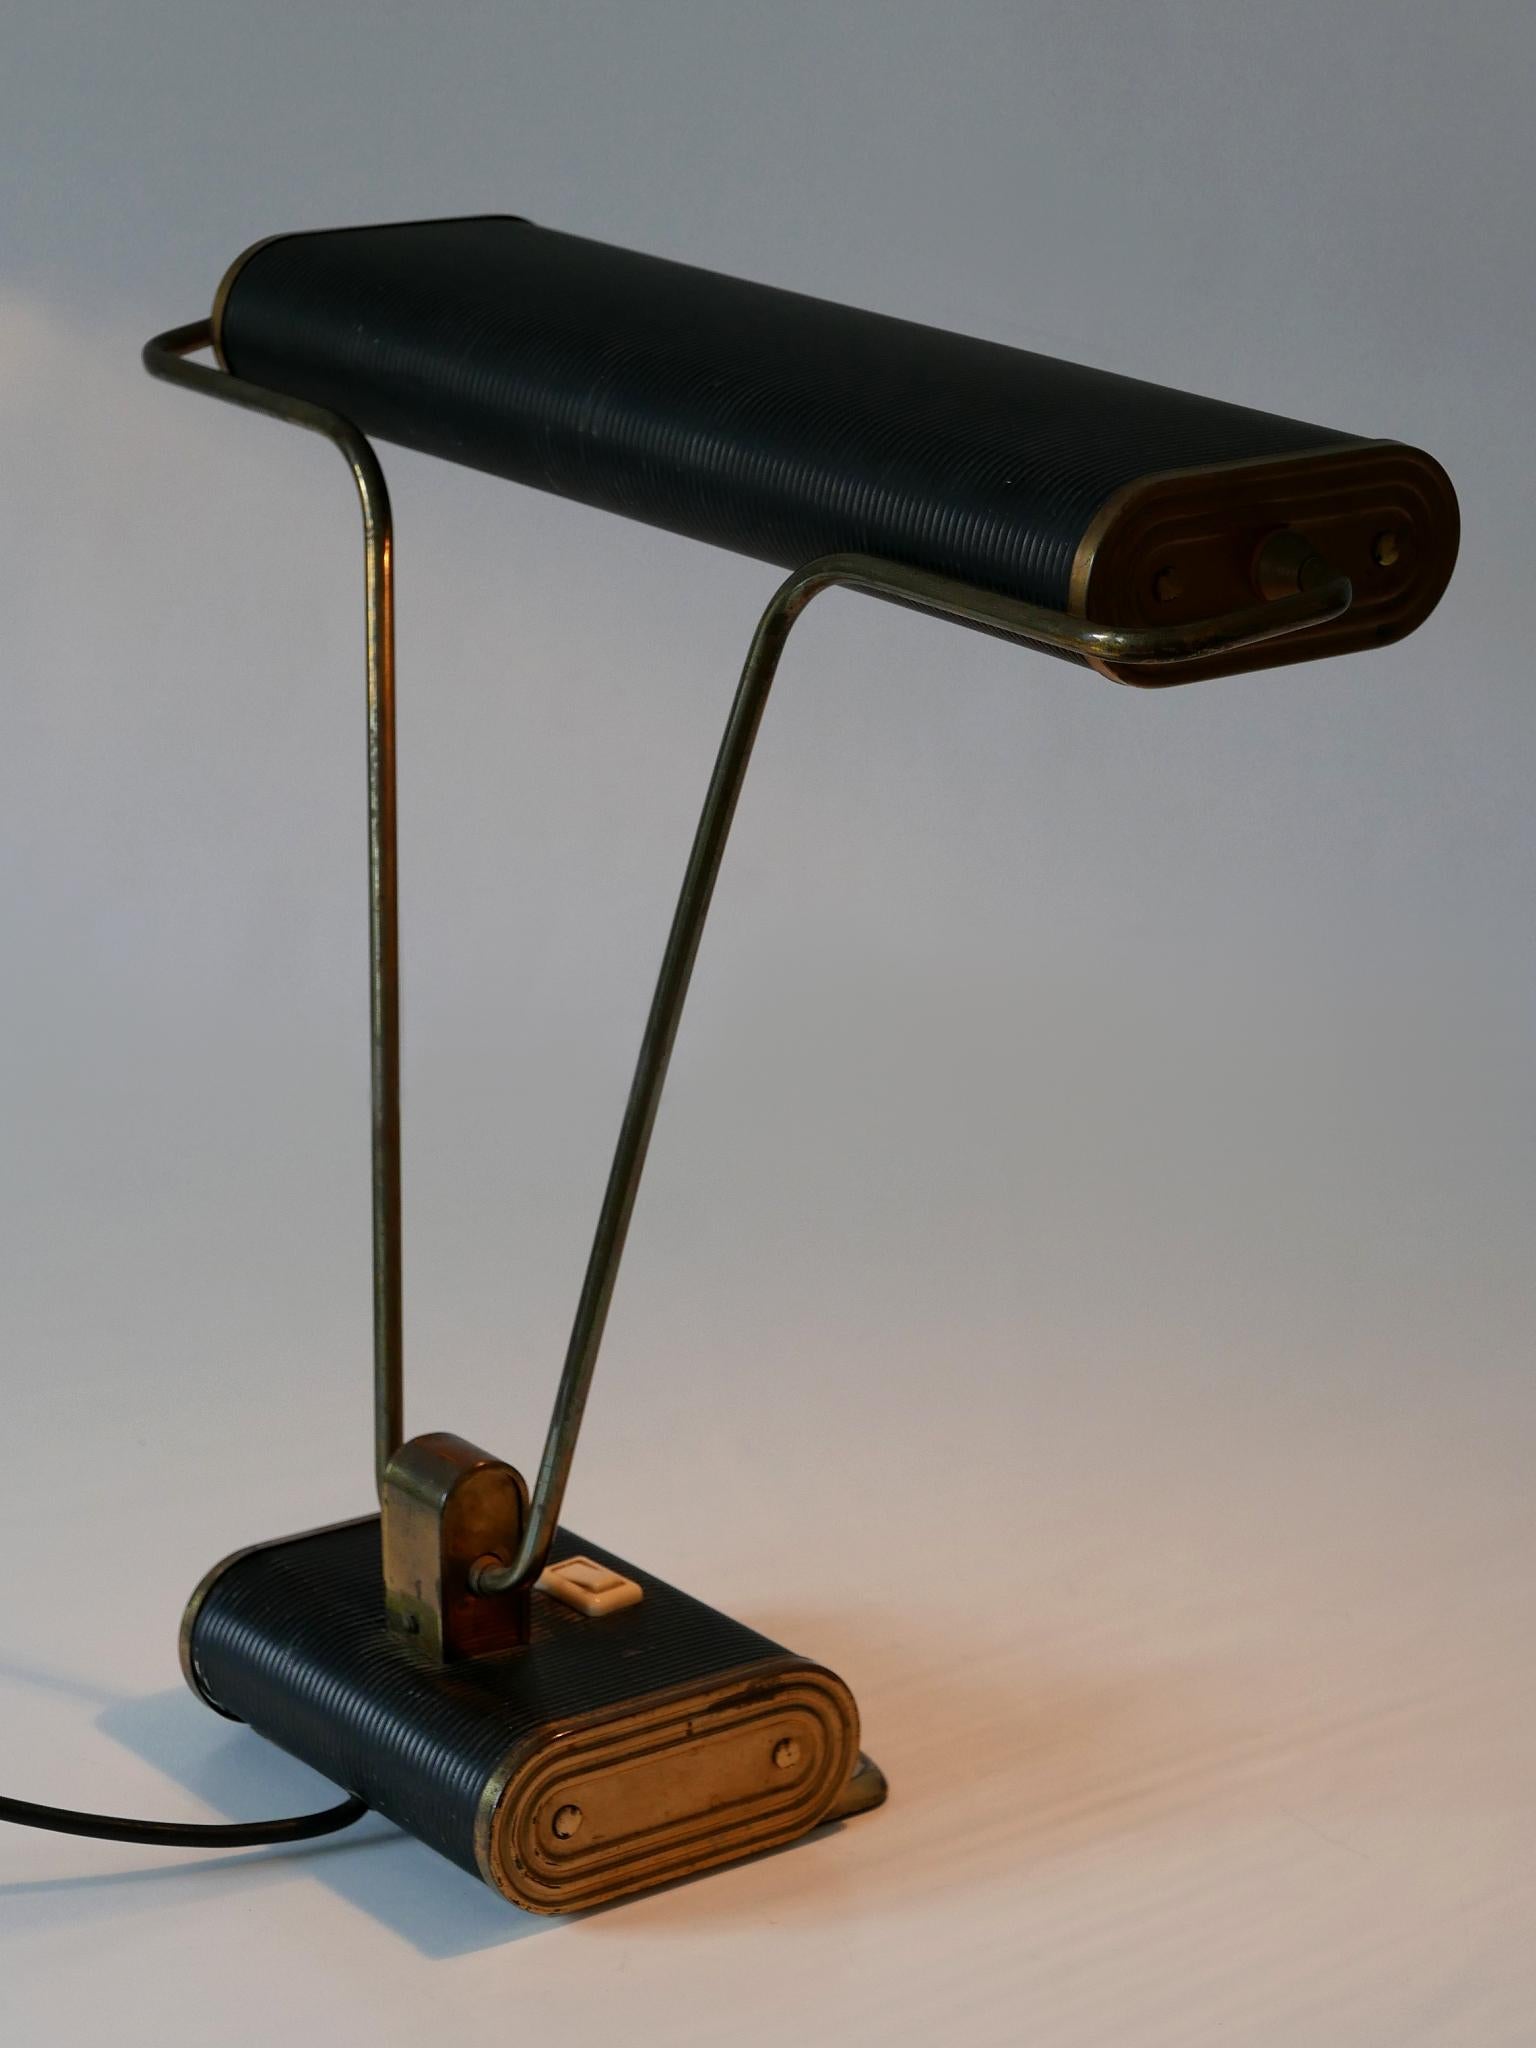 Art Deco Table Lamp or Desk Light 'No 71' by André Mounique for Jumo 1930s For Sale 1